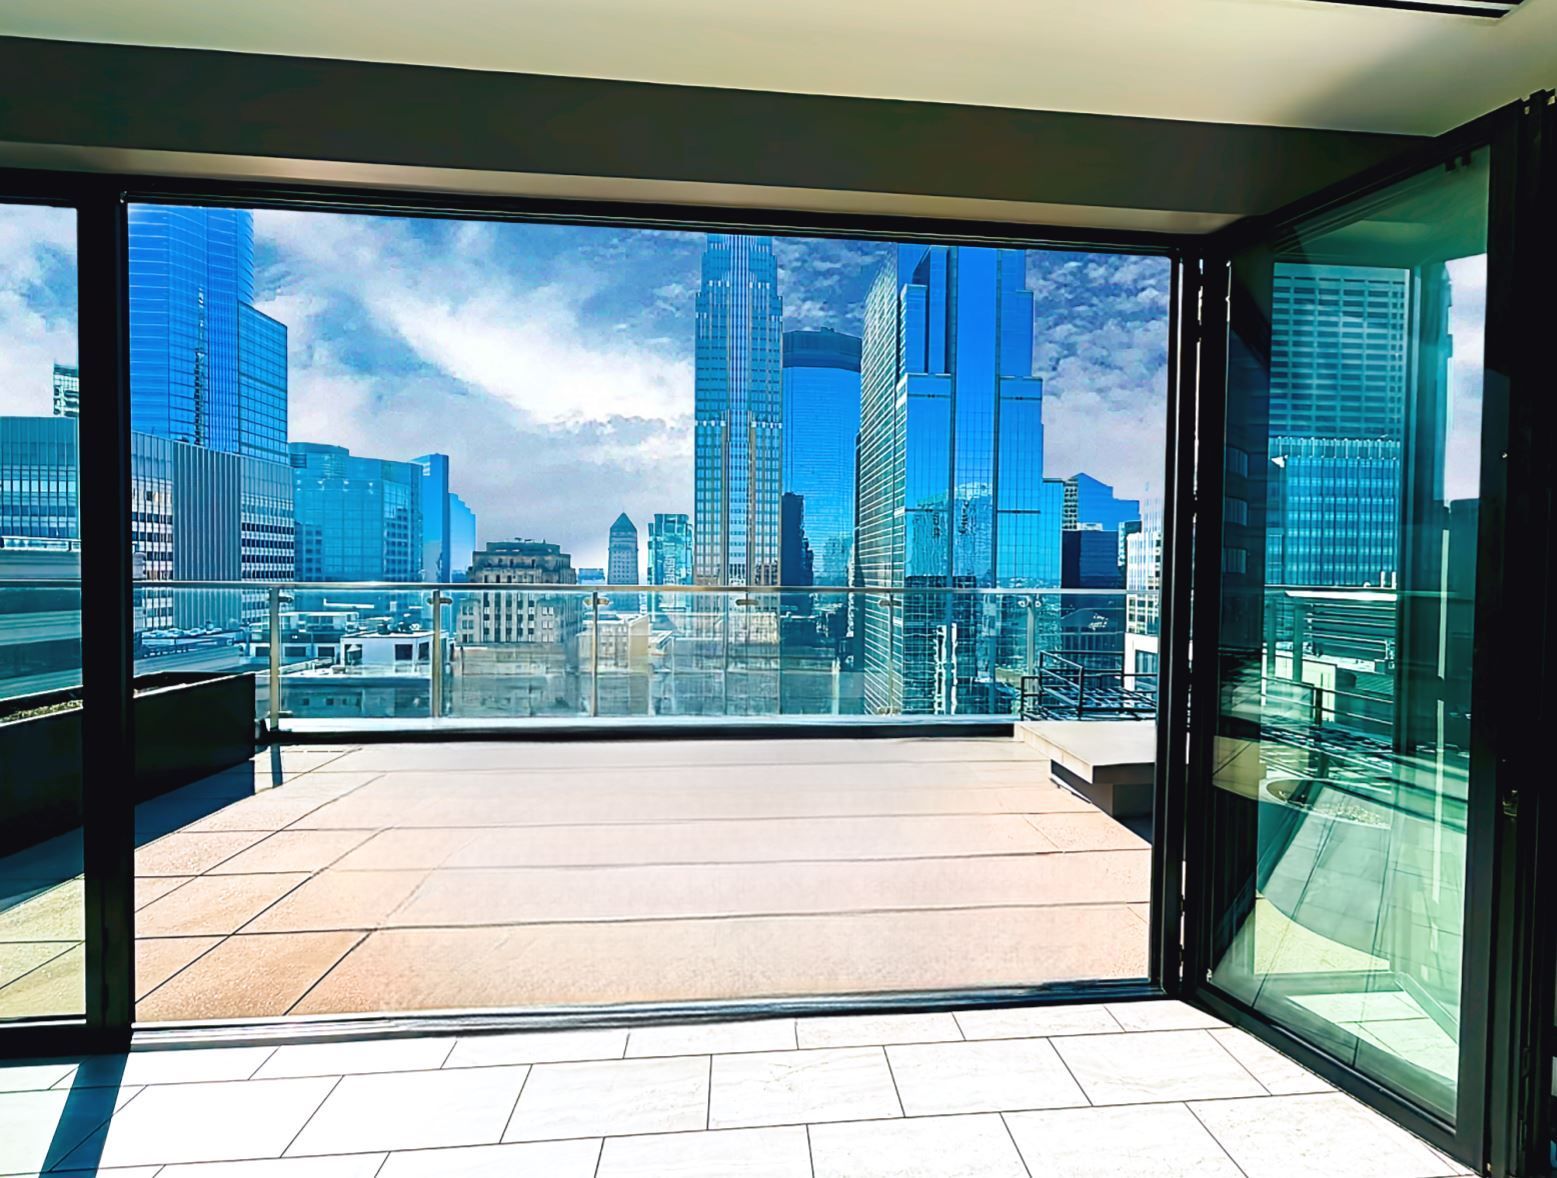 w l hall company 4Marq Apartments (Minneapolis) -
High-Performance and Cost-Effective Window Systems that Produce Amazing Views